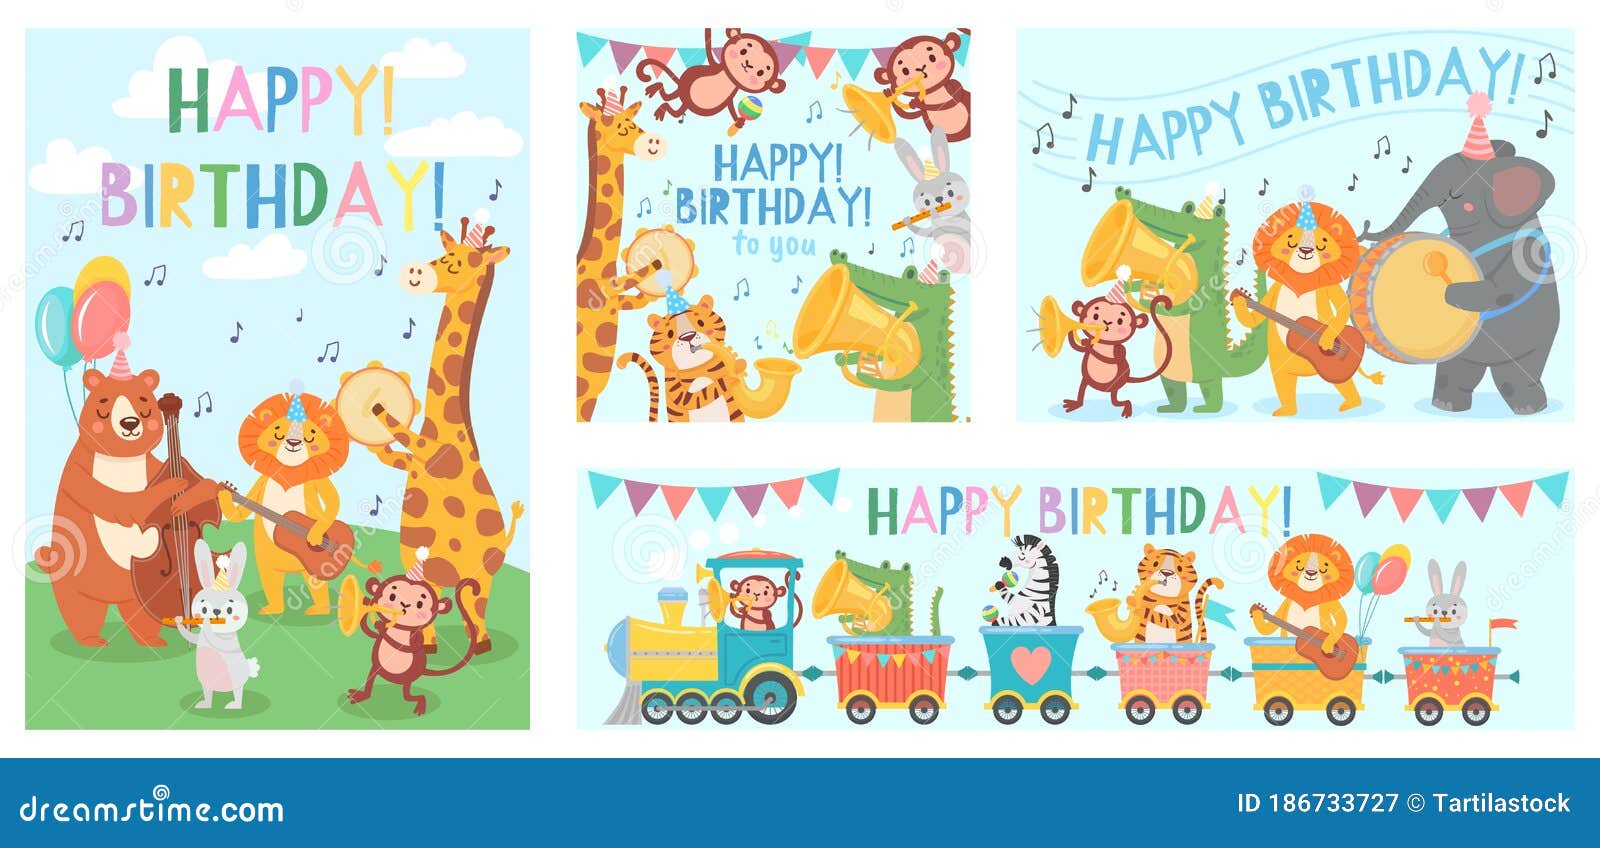 Animals Play Music Greeting Card. Happy Birthday Song Played by Cute  Animals Orchestra with Music Instruments Vector Stock Vector - Illustration  of cute, monkey: 186733727